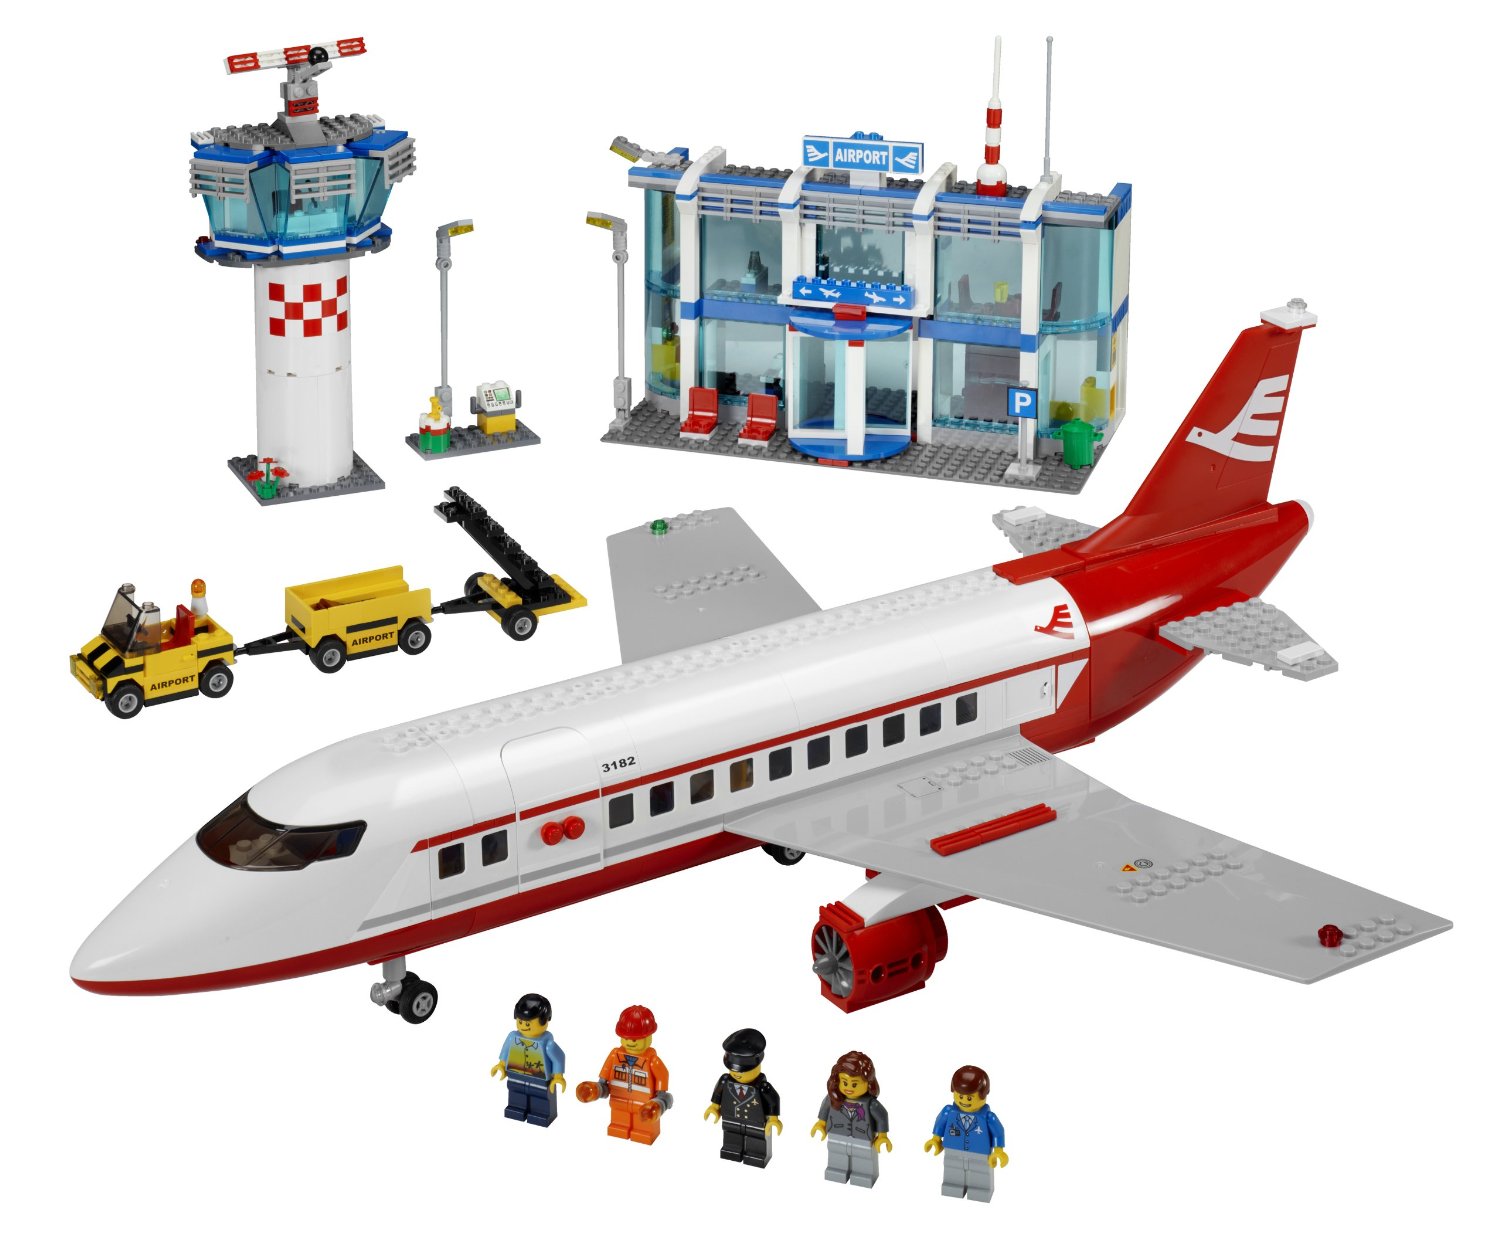 Lego Planes & Helicopters